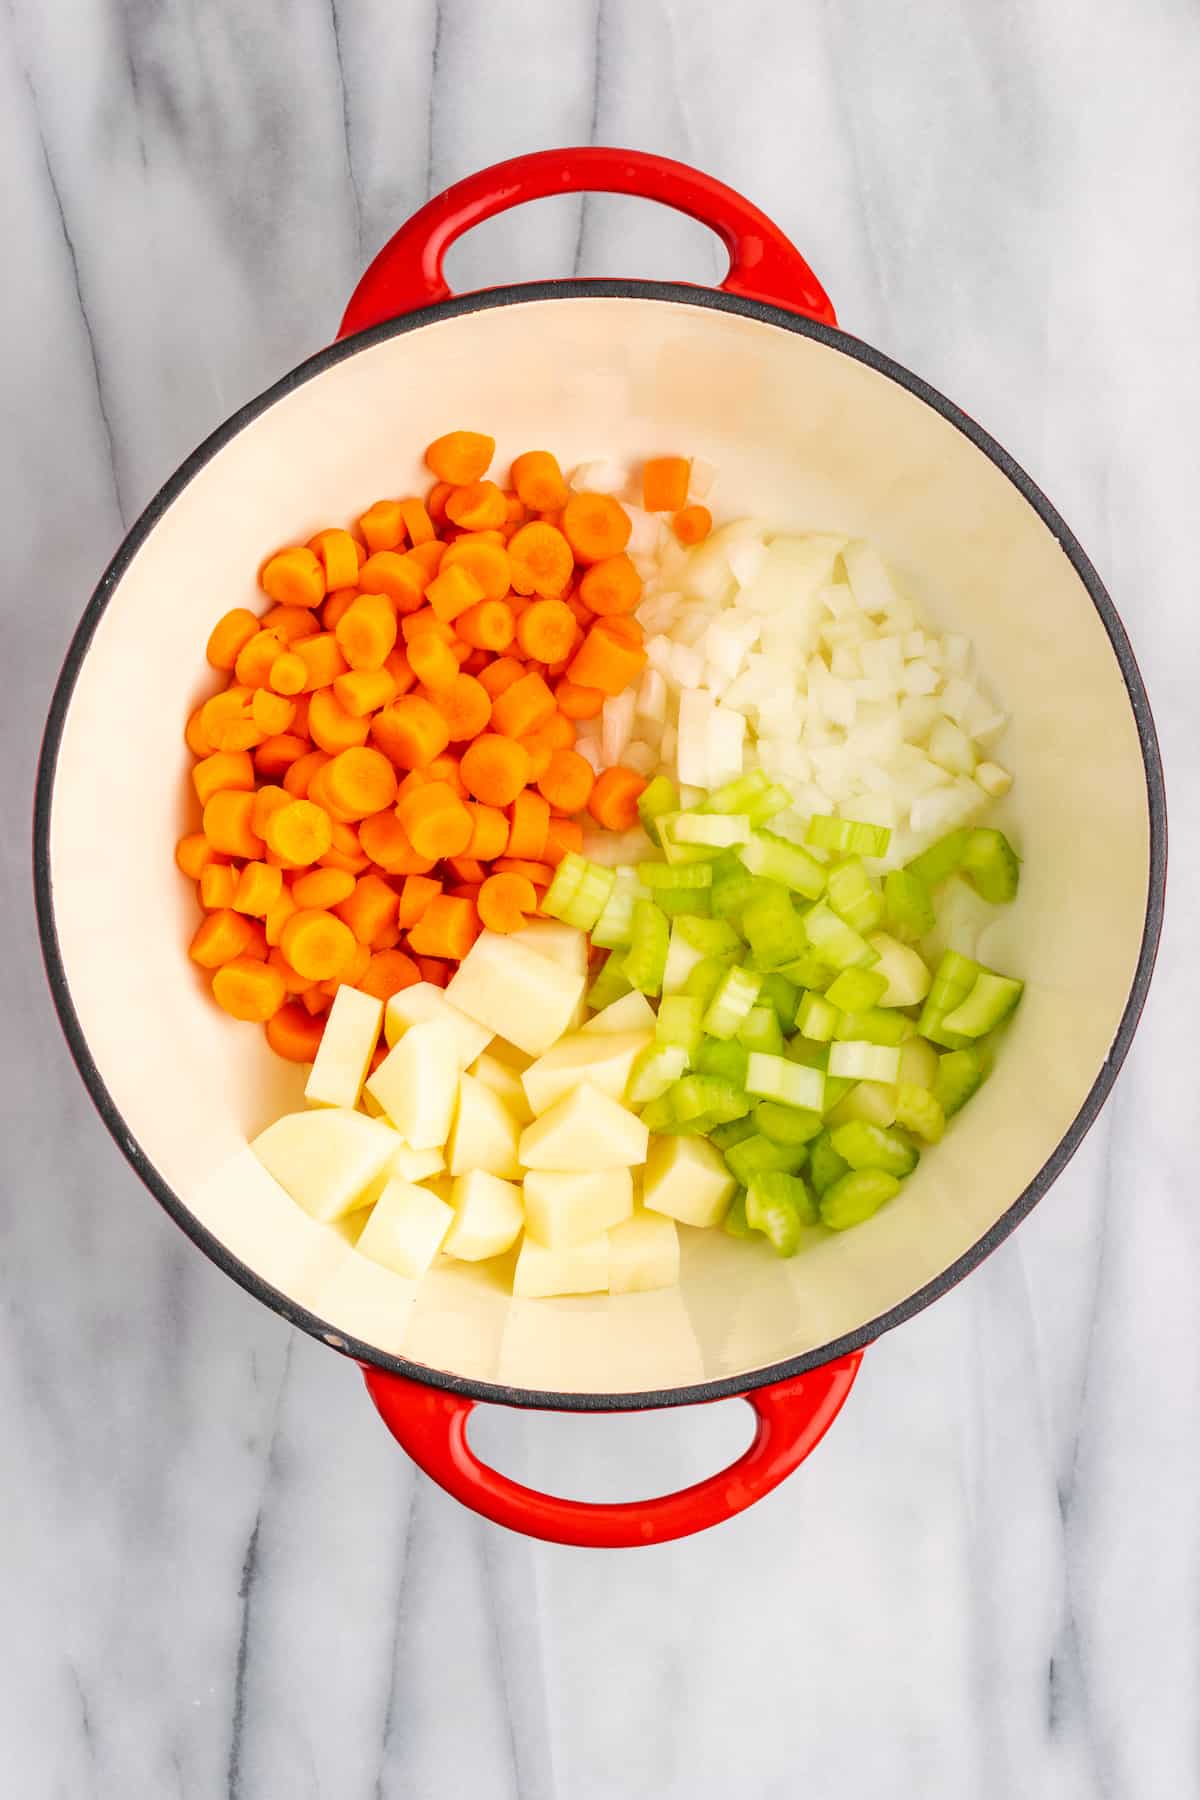 Dutch oven with raw carrots, potatoes, celery, and onions in it, divided into triangles